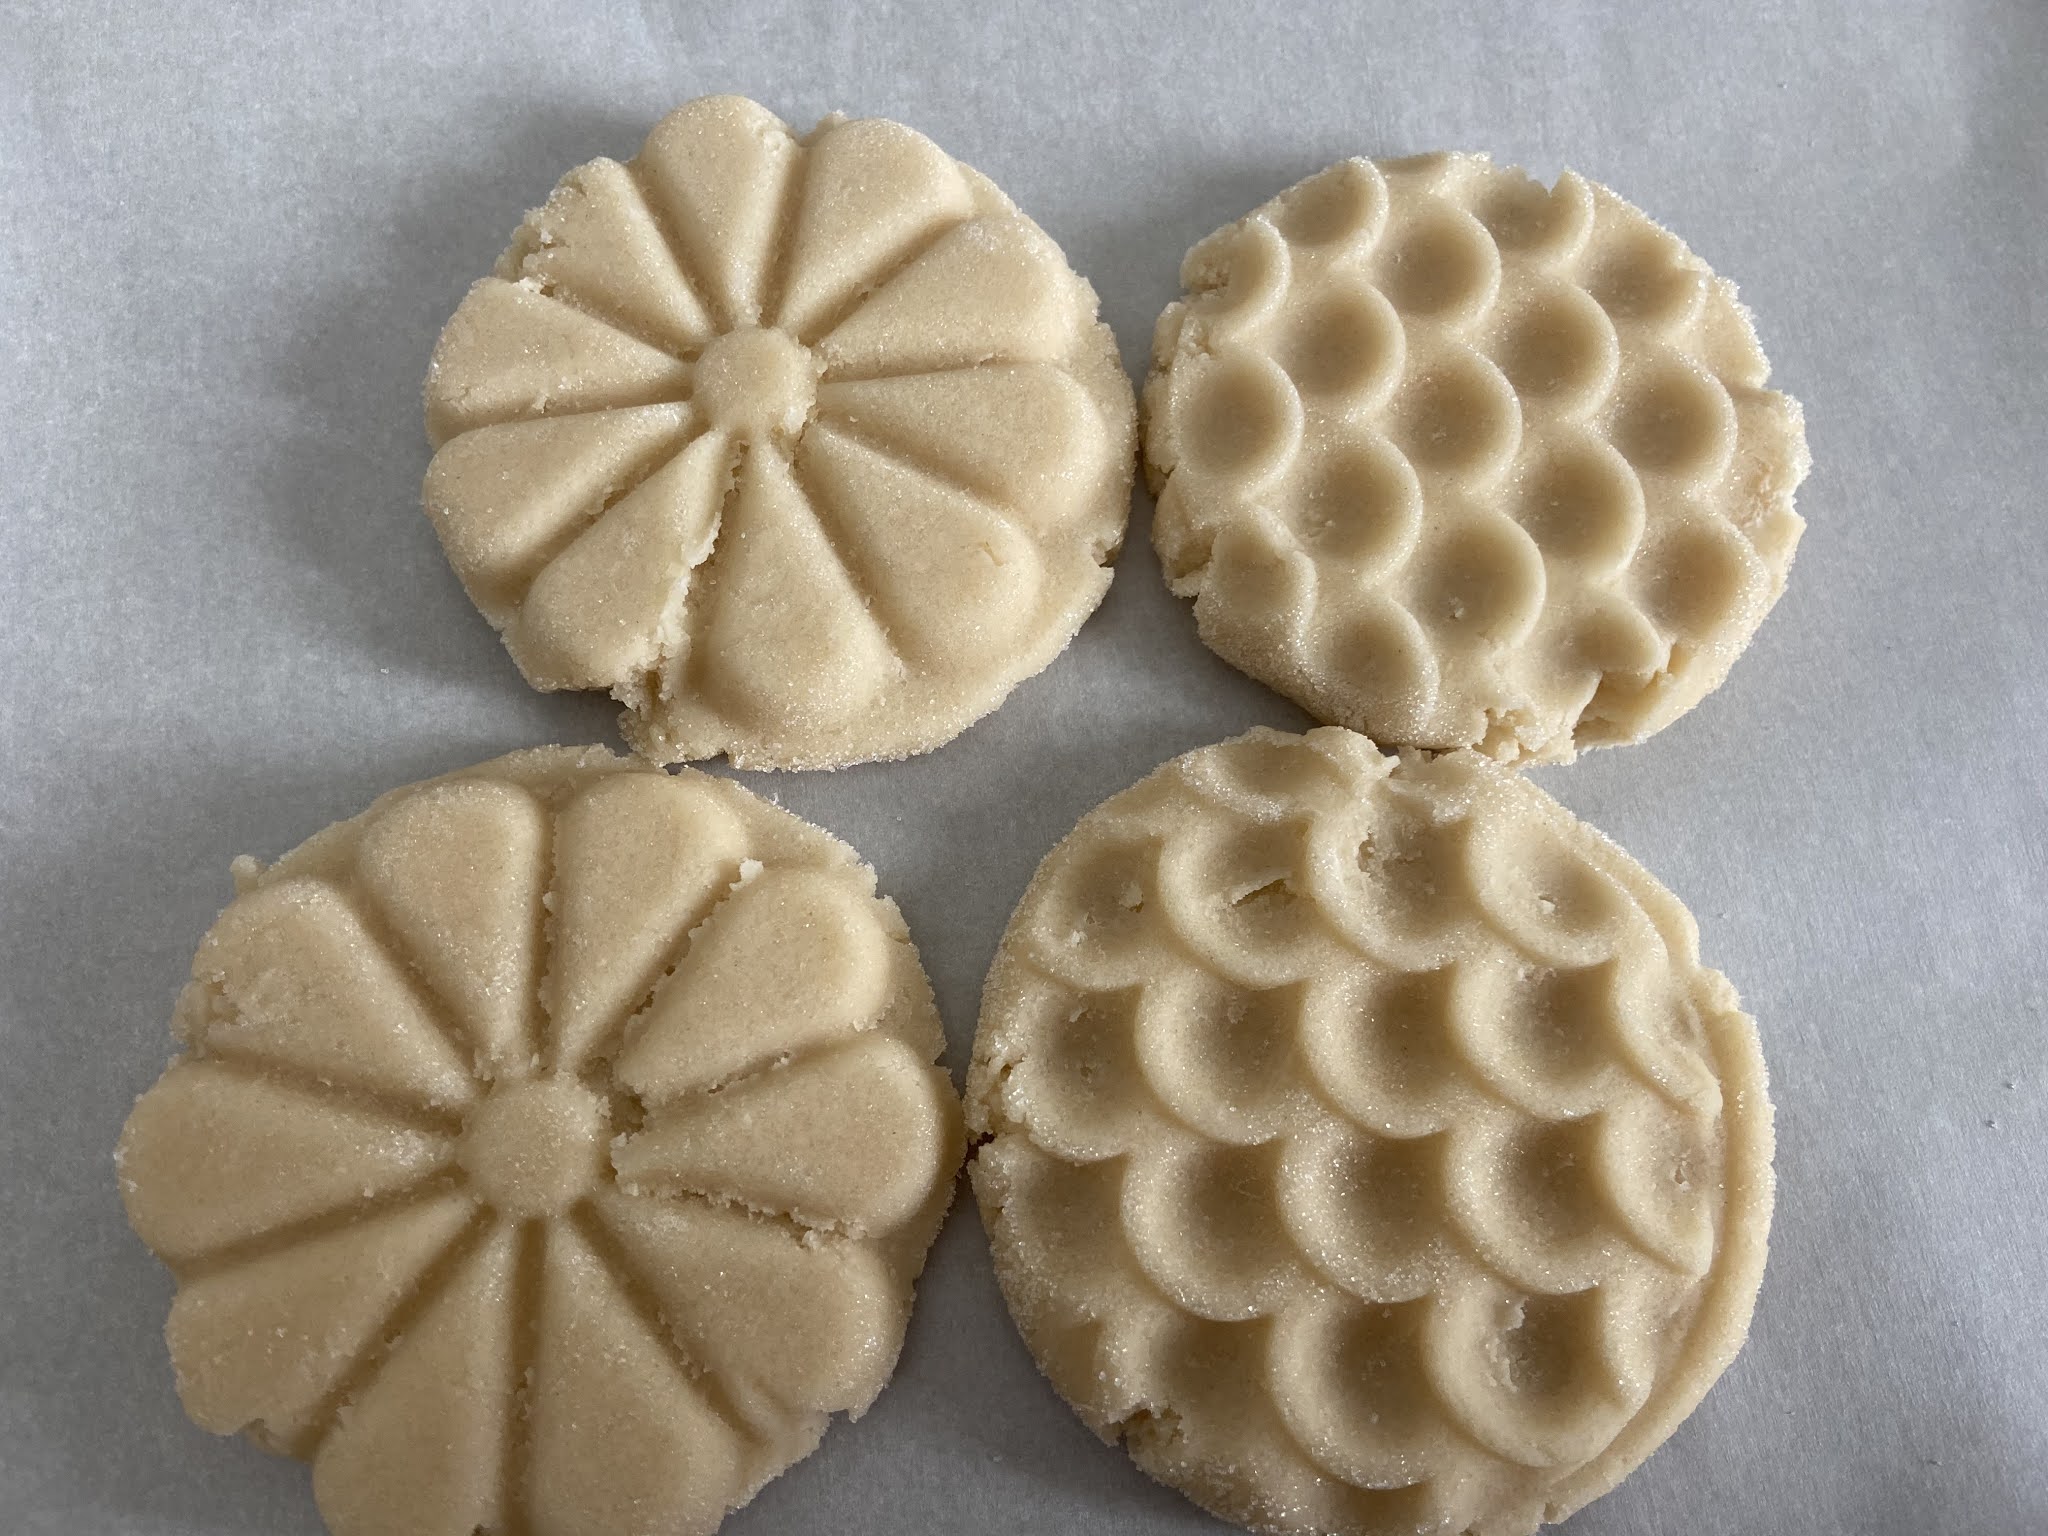 SHORTBREAD STAMPED COOKIES – The Flour Diaries™